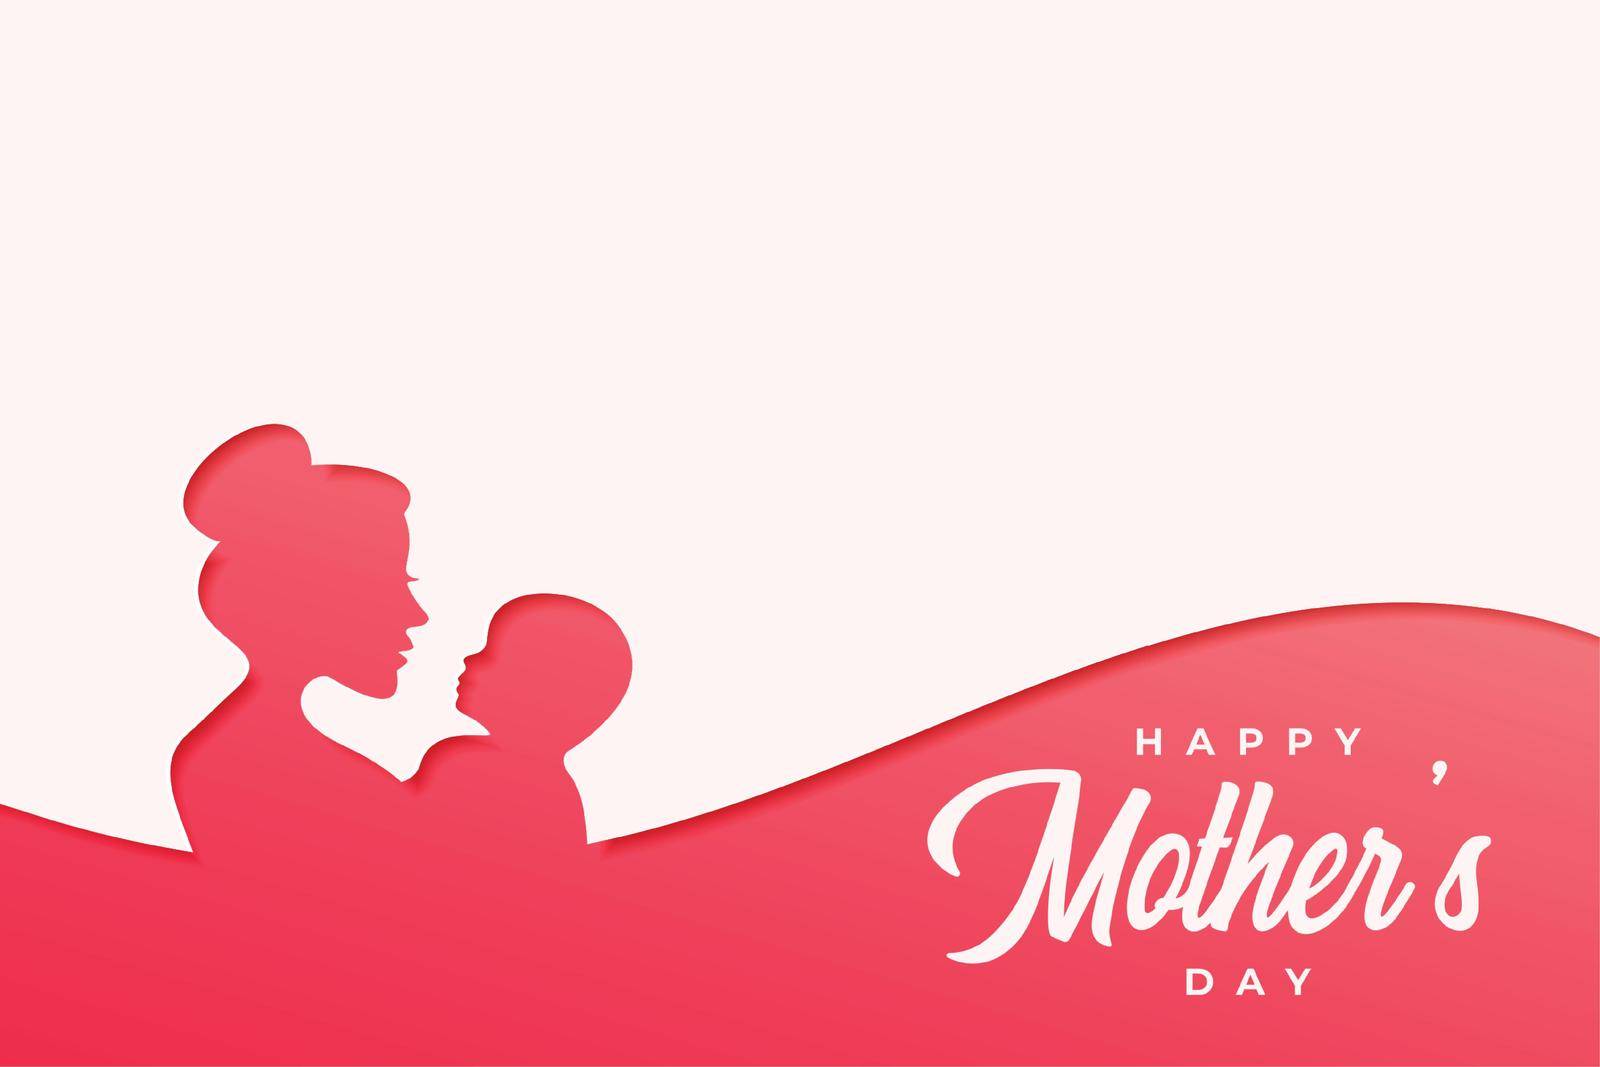 happy mother's day poster design with mom and child figure